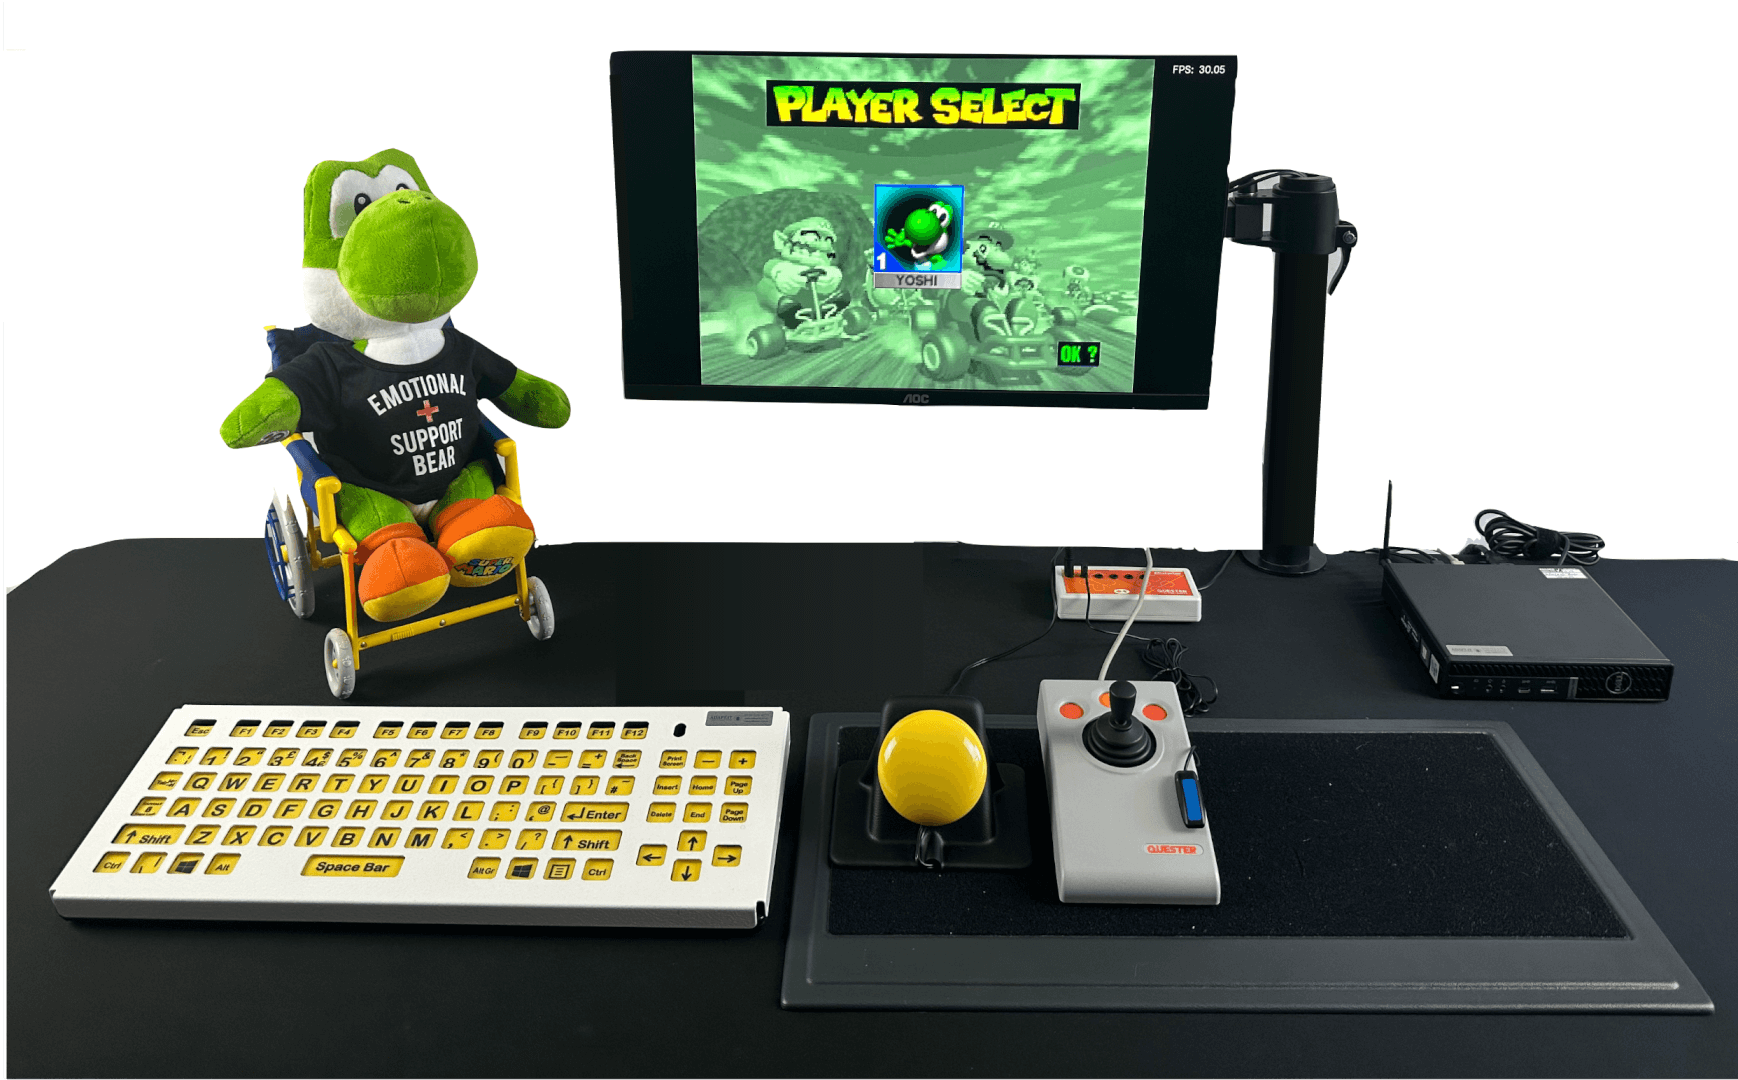 A computer setup on a black table featuring a yellow large key keyboard, a yellow assistive switch, grey joystick and an orange switch. There is a monitor mounted to the table with a Yoshi plush in a teddy wheelchair next to it.